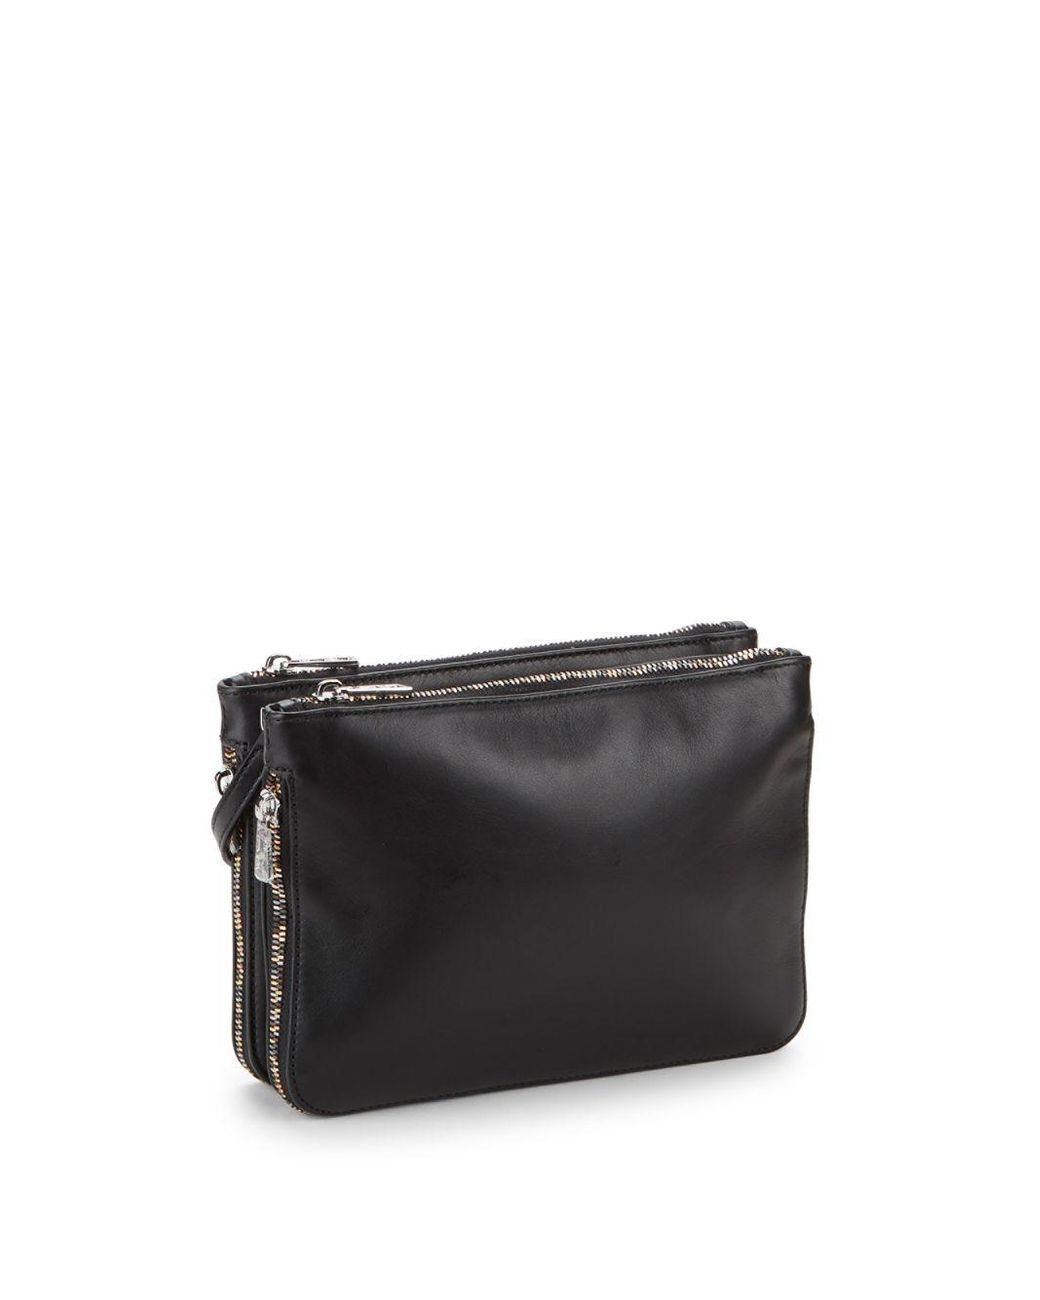 Zadig & Voltaire Clyde Leather Crossbody Bag in Black | Lyst